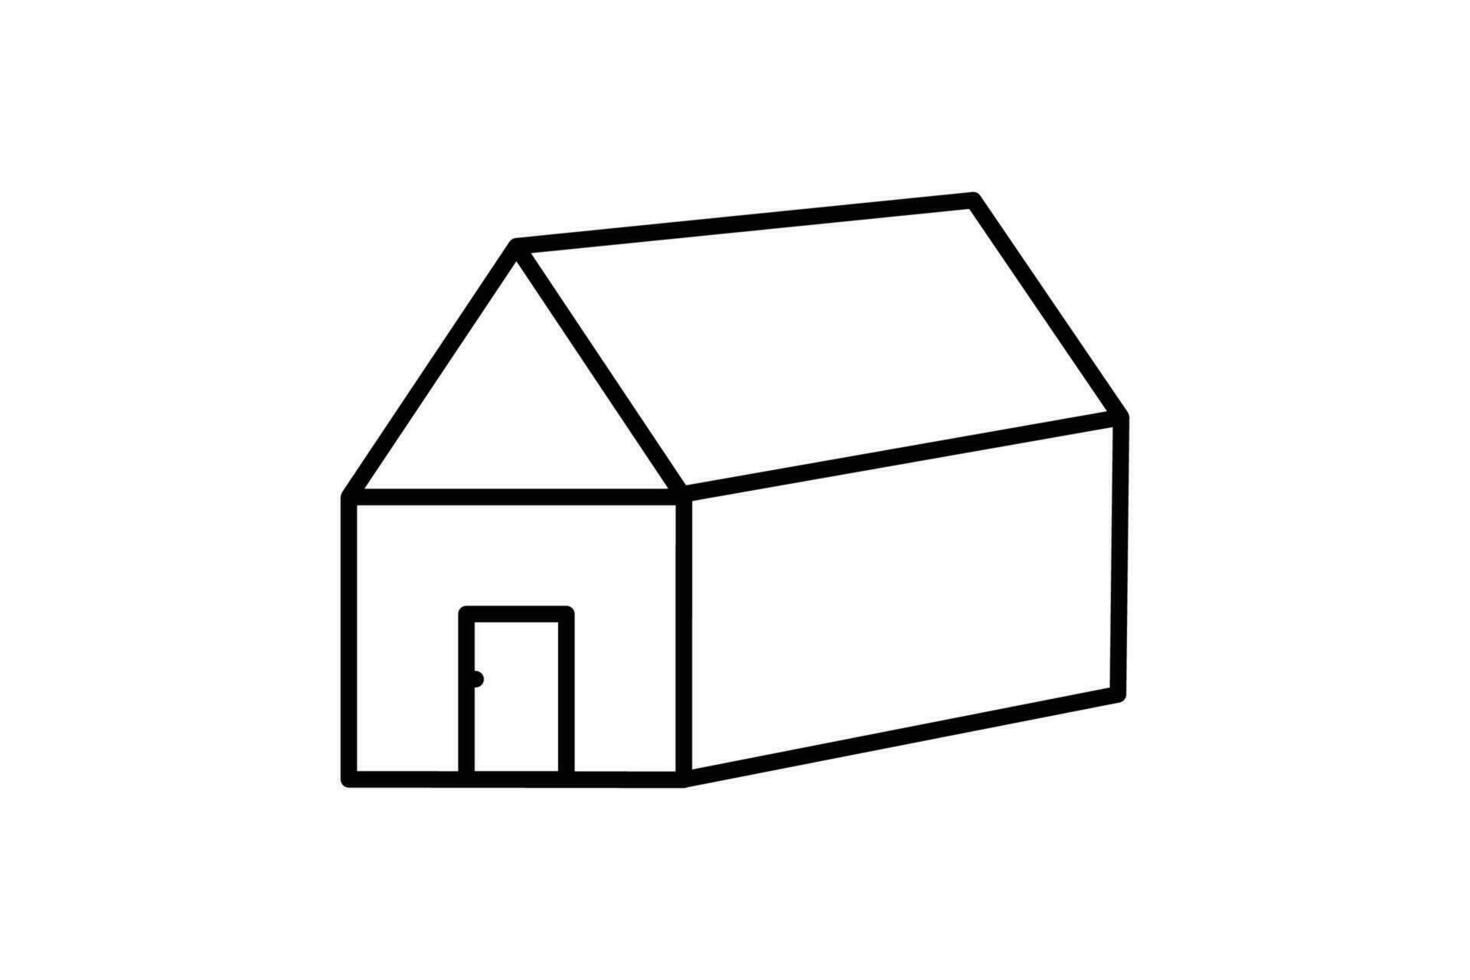 Real estate icon. Icon related to real estate, building. Line icon style design. Simple vector design editable